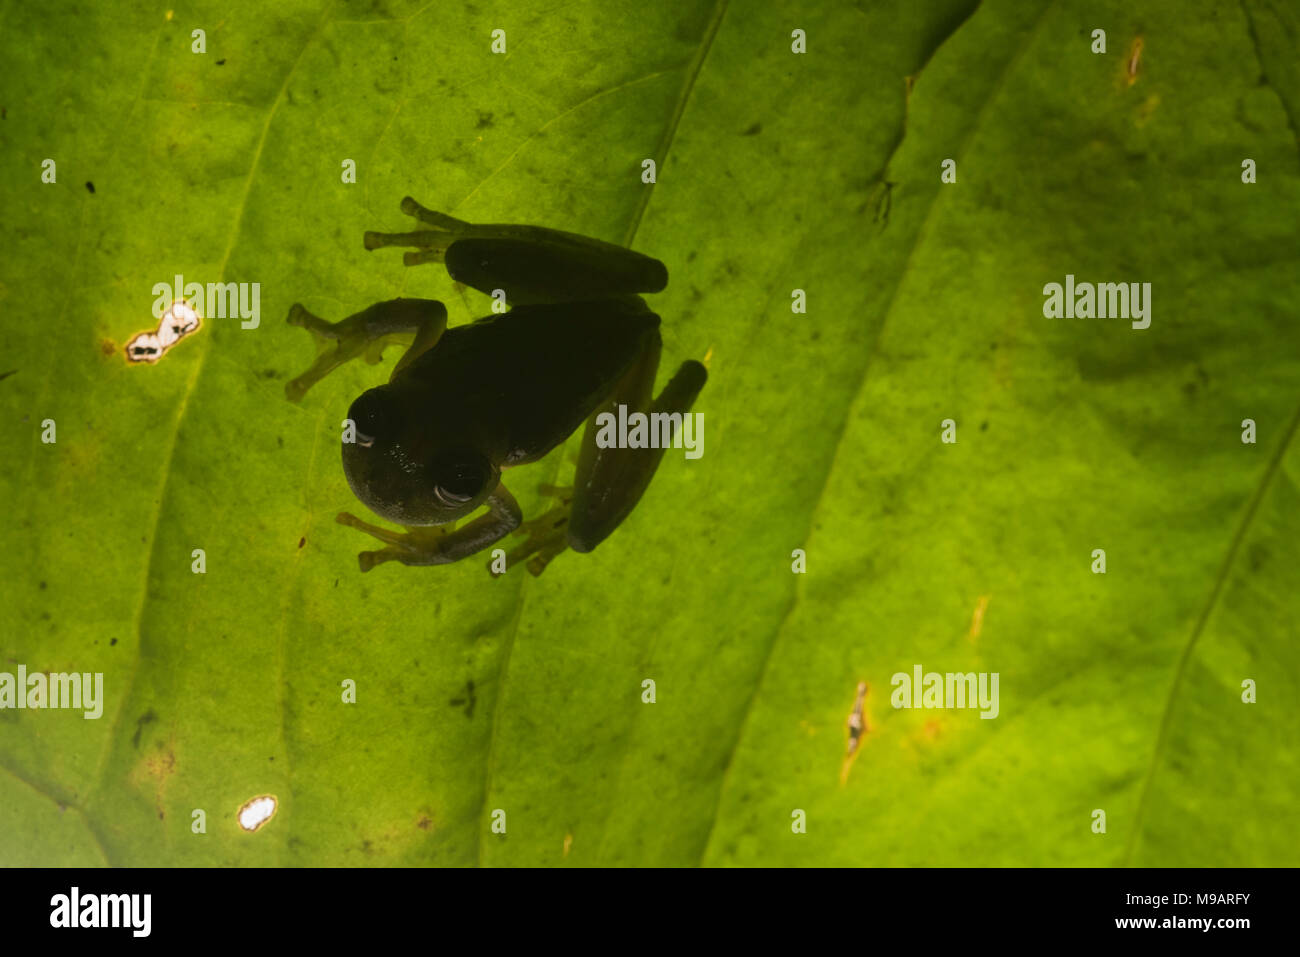 A glassfrog (Rulyrana saxiscandens) illuminated by a flash positioned behind the leaf it was sitting on. Stock Photo